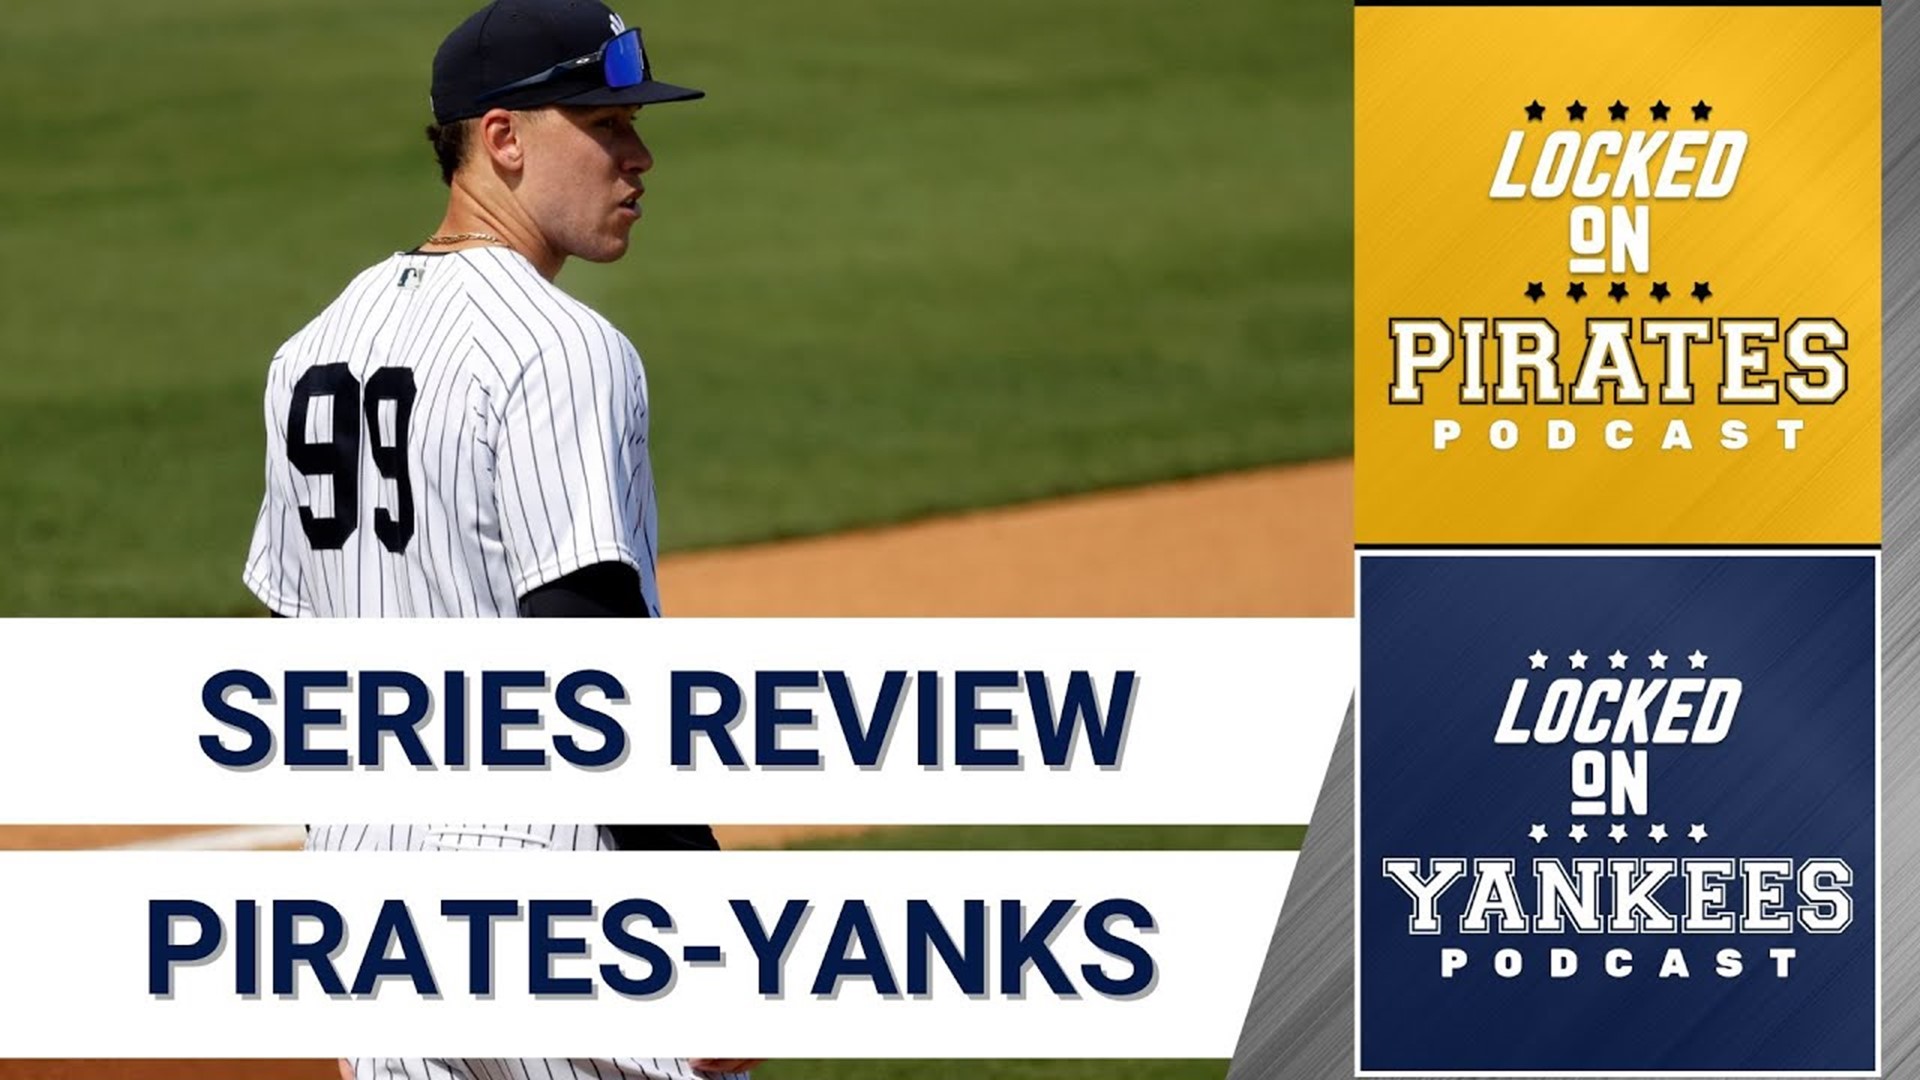 Stacey Gotsulias of Locked On Yankees and Ethan Smith of Locked On Pirates continue reviewing the series the Yankees and Pirates played this week.